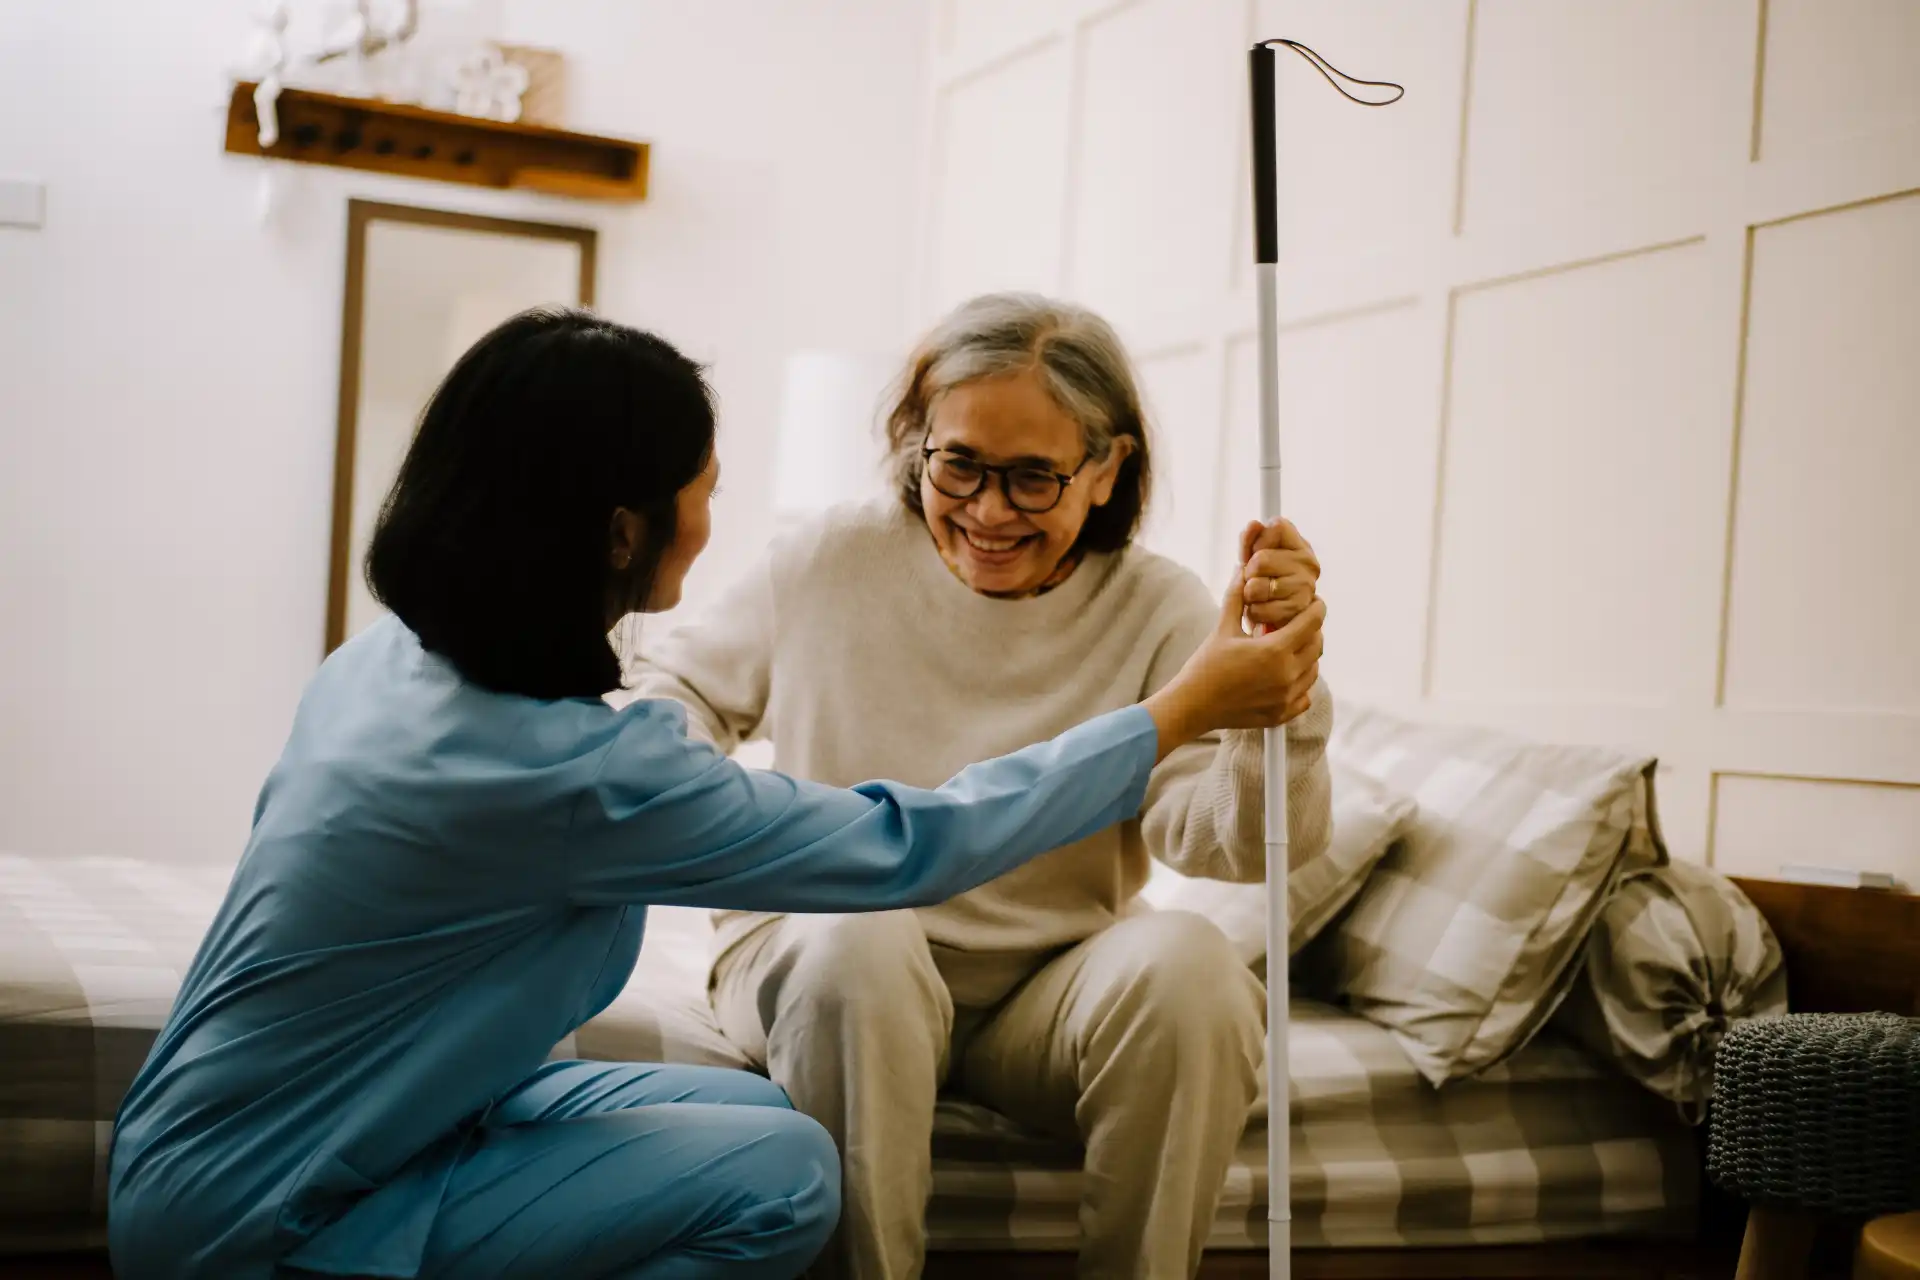 home care services,home care service,personal care service,personal care services near me,in-home caregiving services,homemakers,in-home care giving